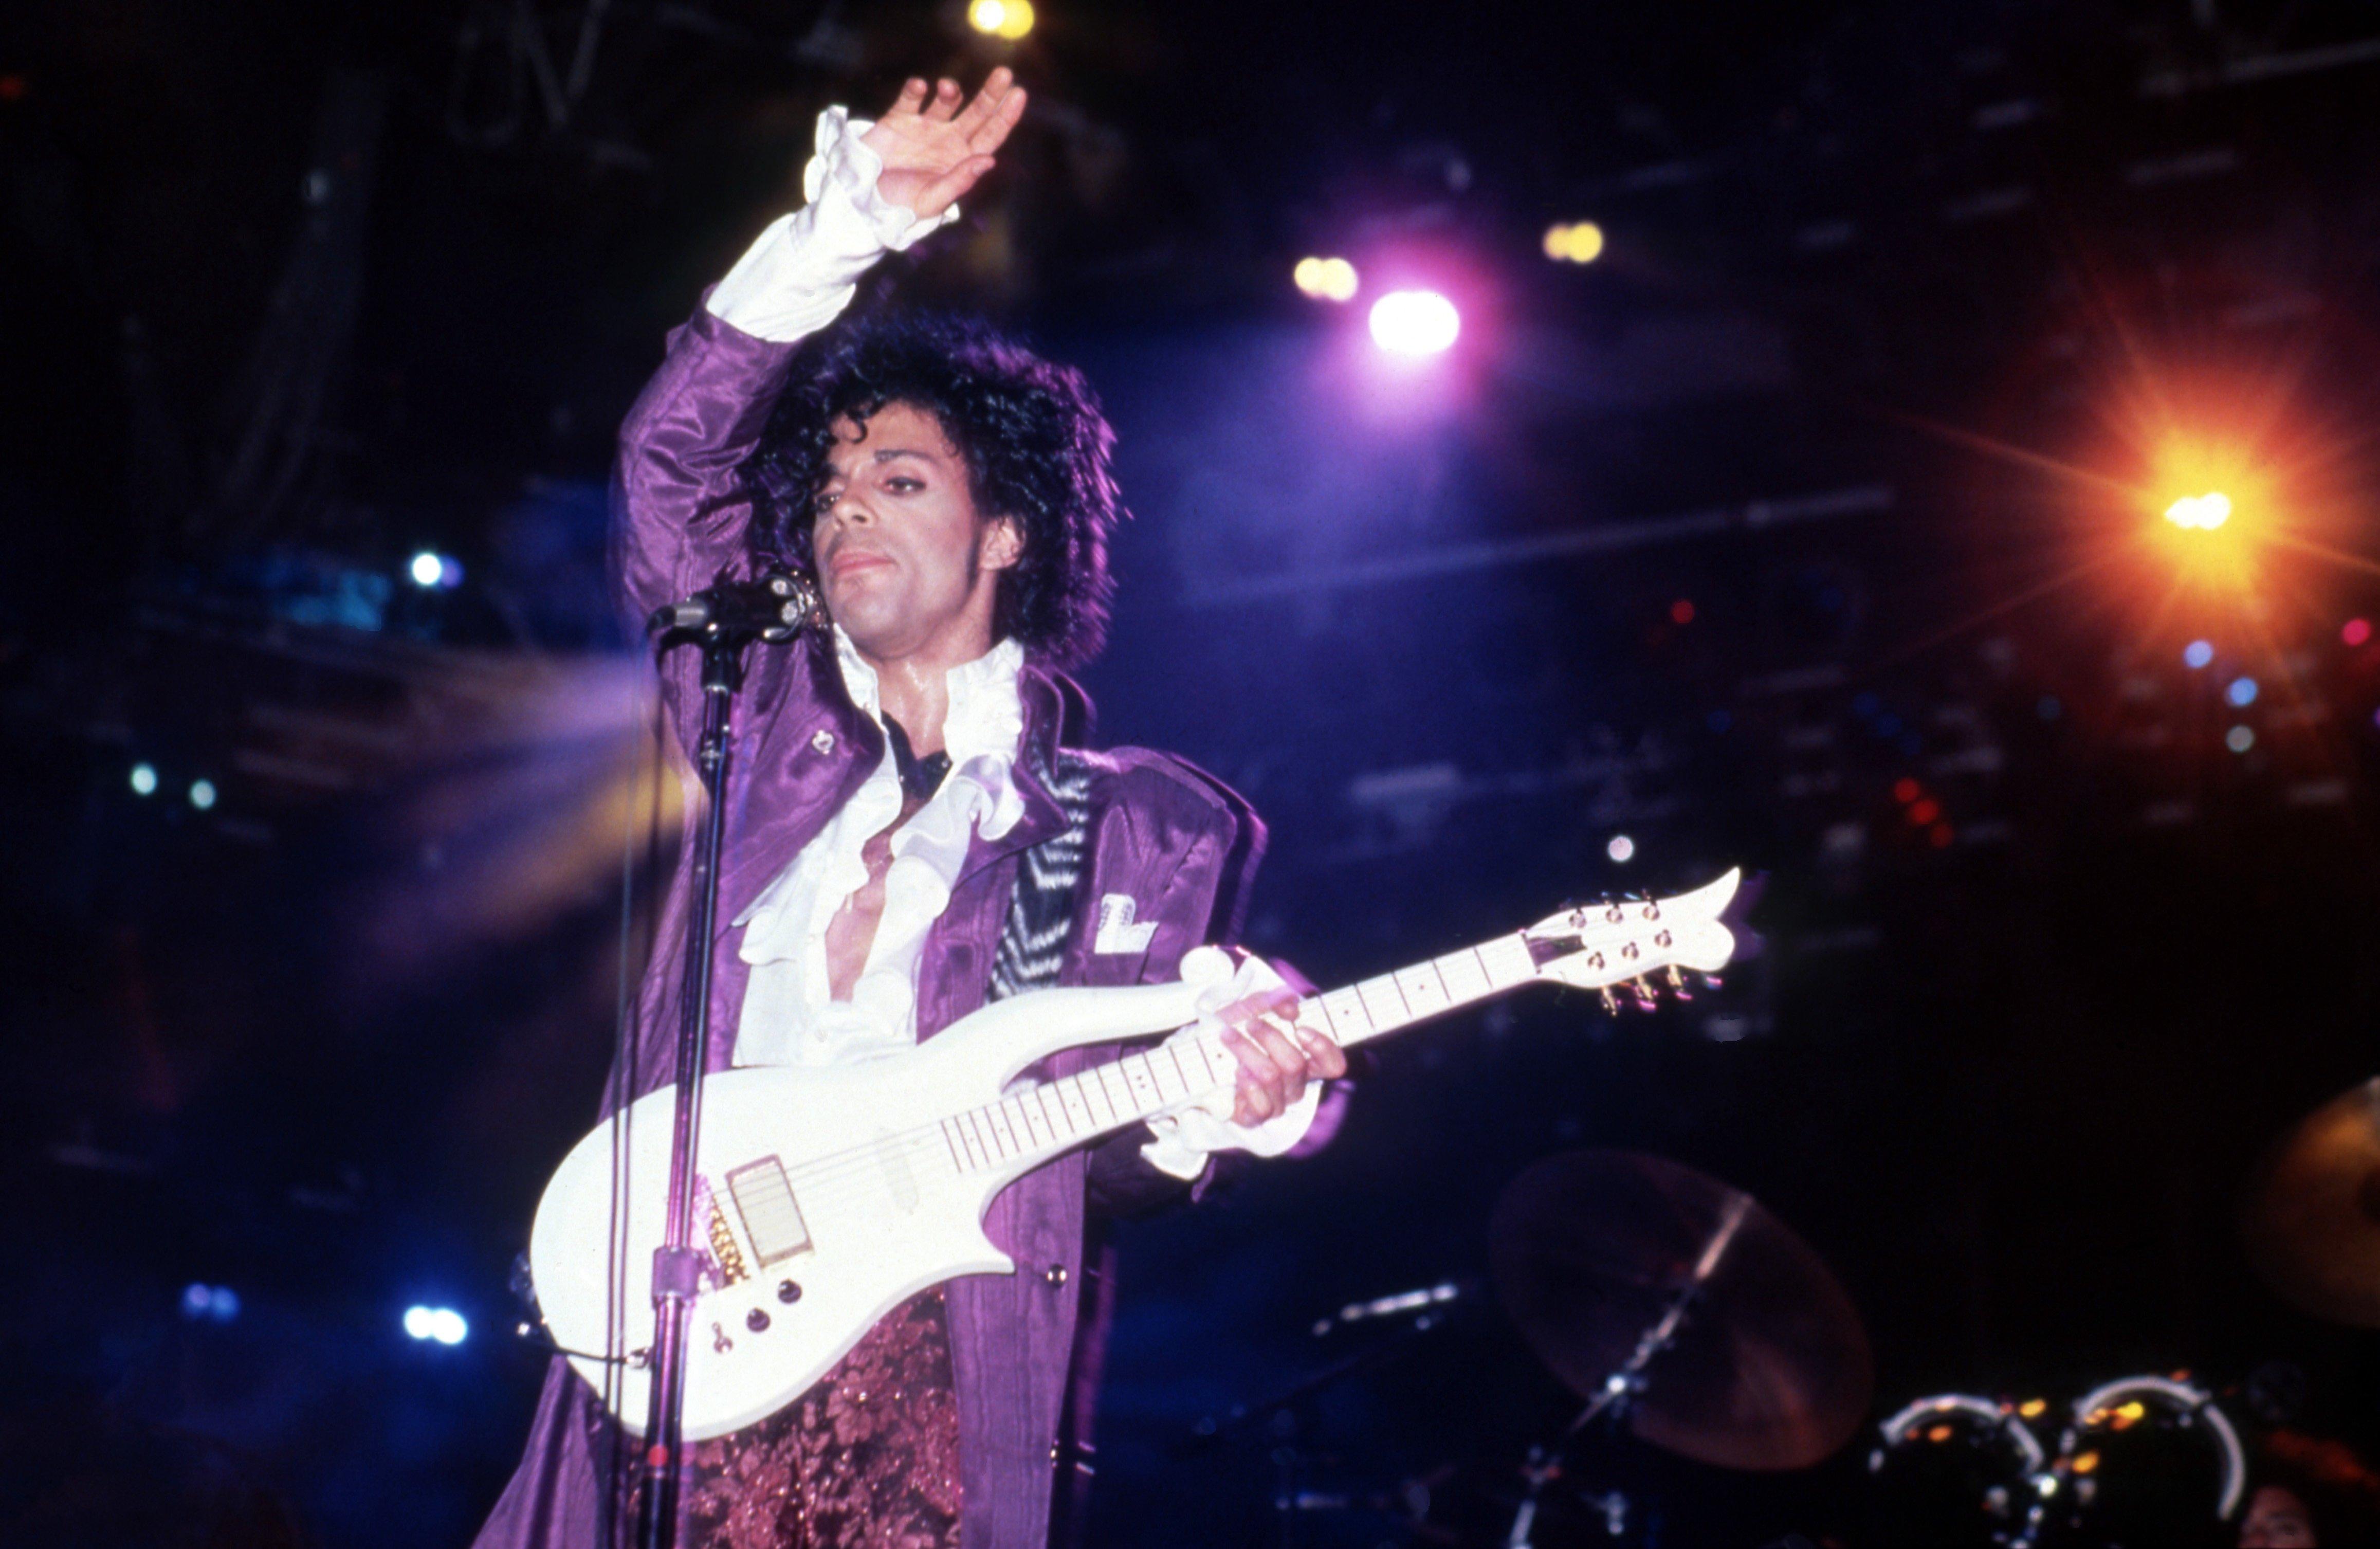 7 Reasons Why Prince's 'Purple Rain' Is One Of Music’s Most Influential Albums